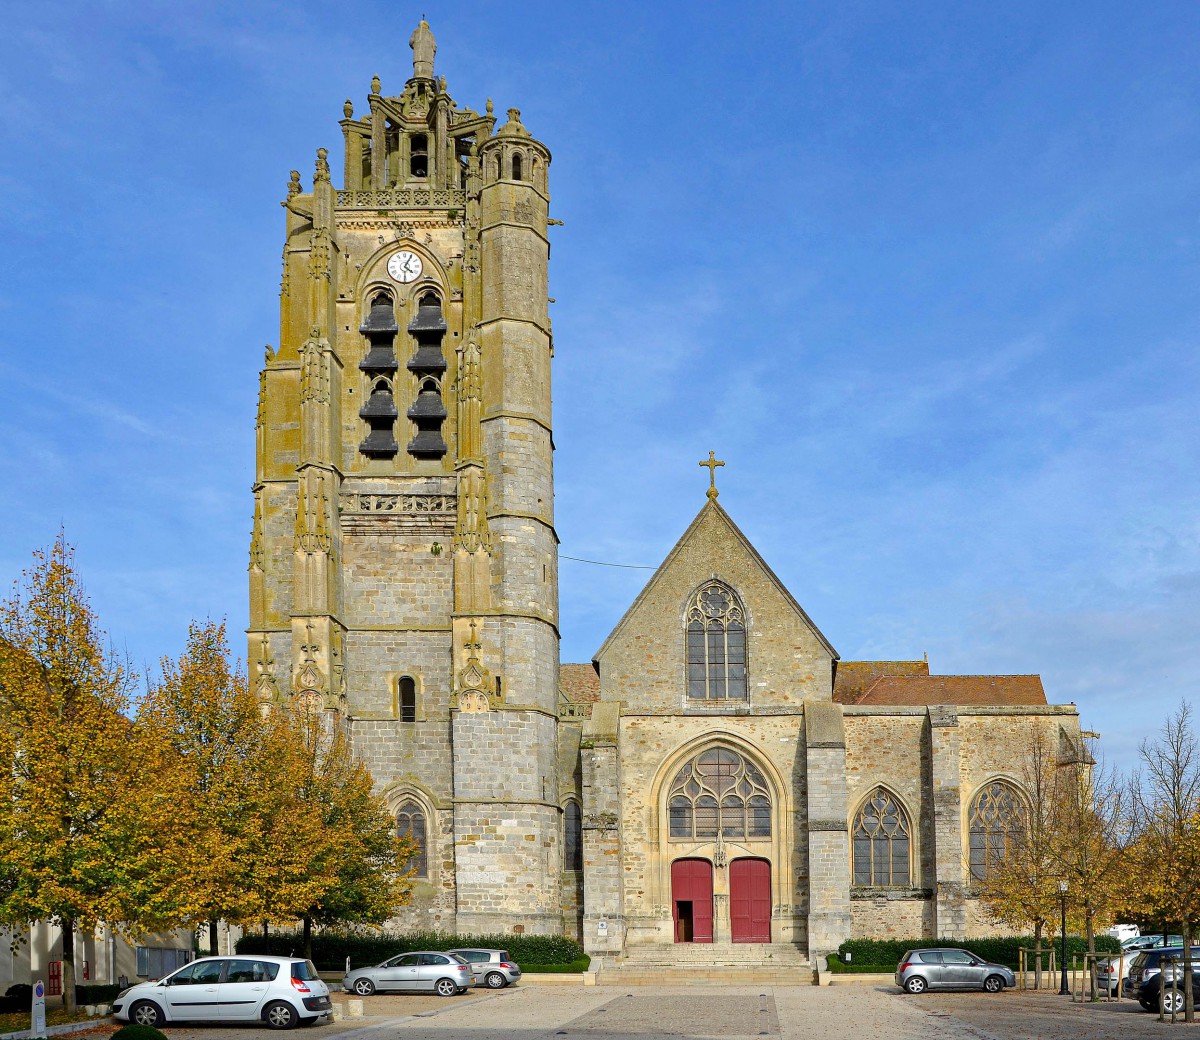 St-Laurent Church in Nogent-sur-Seine - licence [CC BY-SA 3.0] from Wikimedia Commons